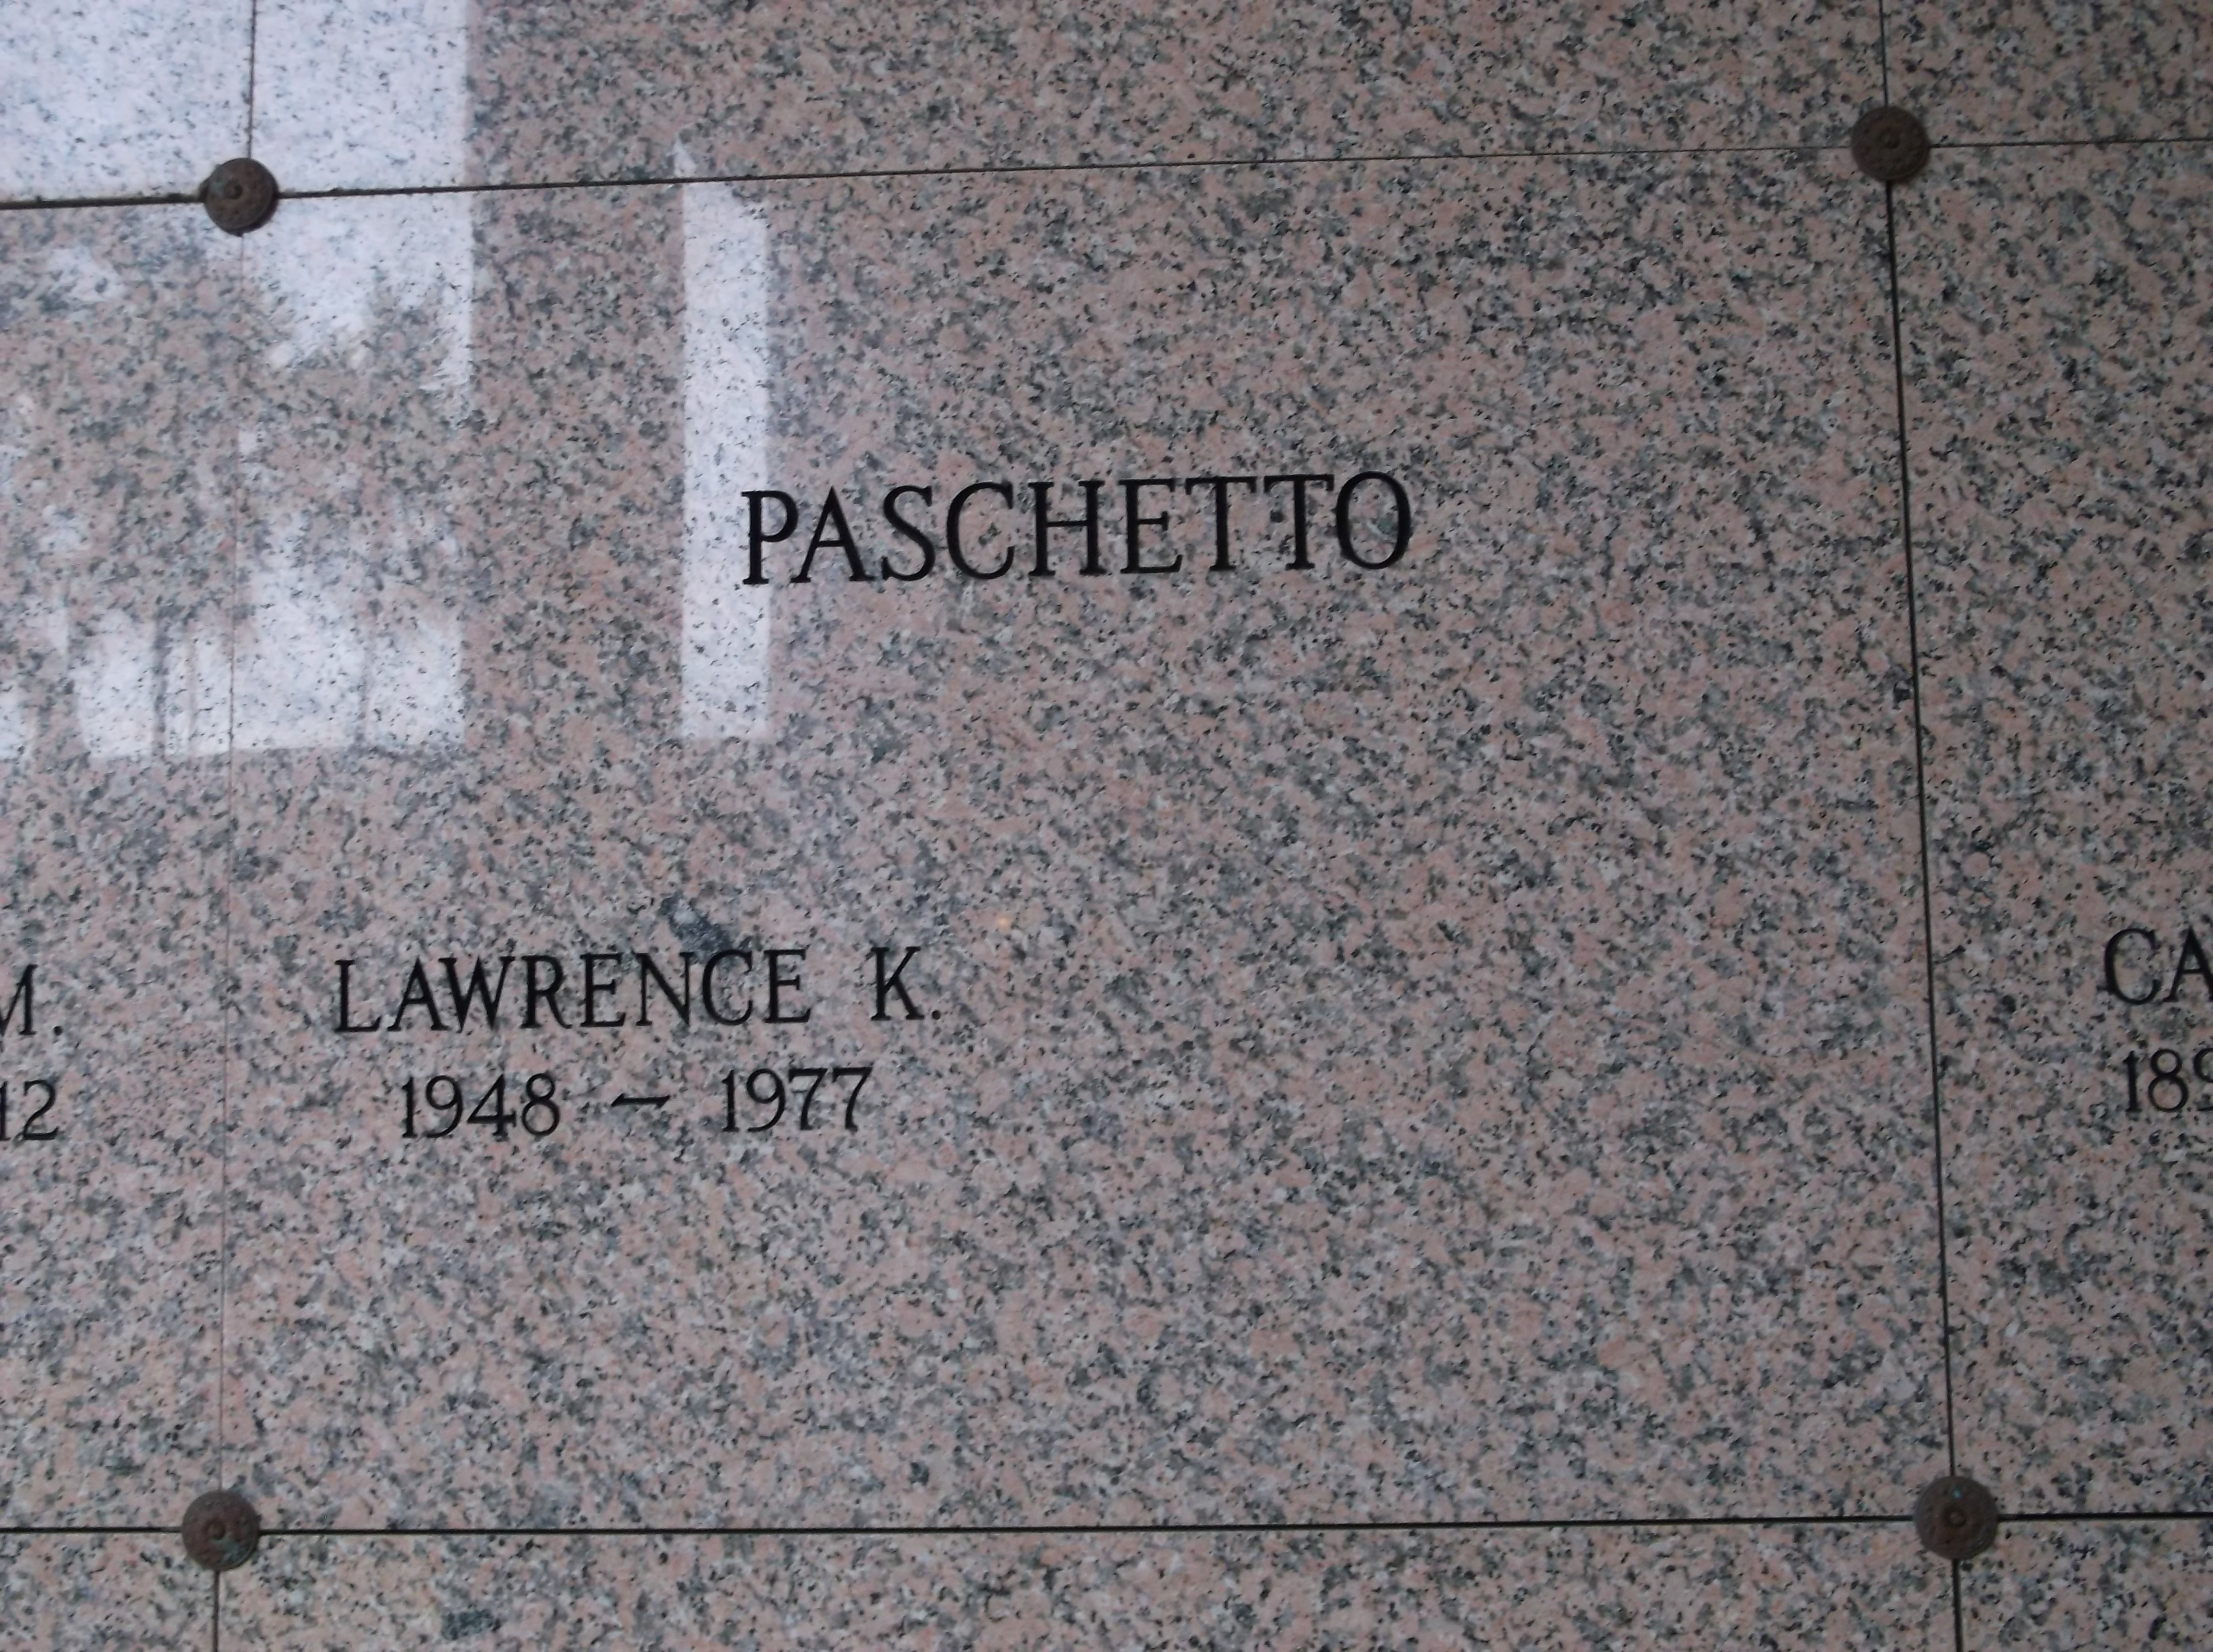 Lawrence K Paschetto